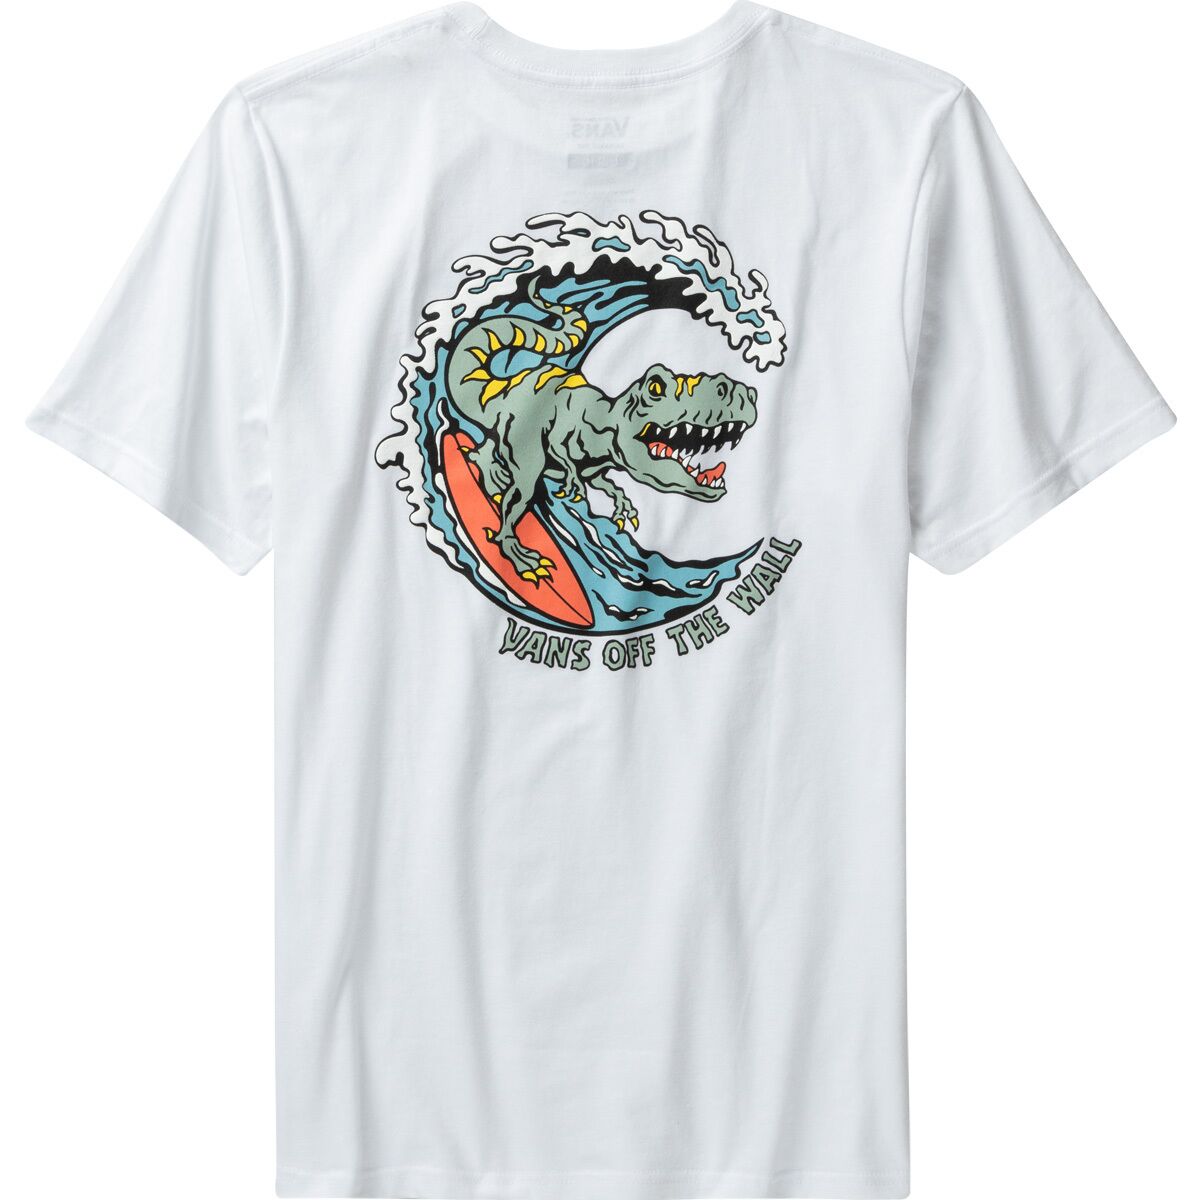 Vans Off The Wall Surf Dino Short-Sleeve Graphic T-Shirt - Boys'